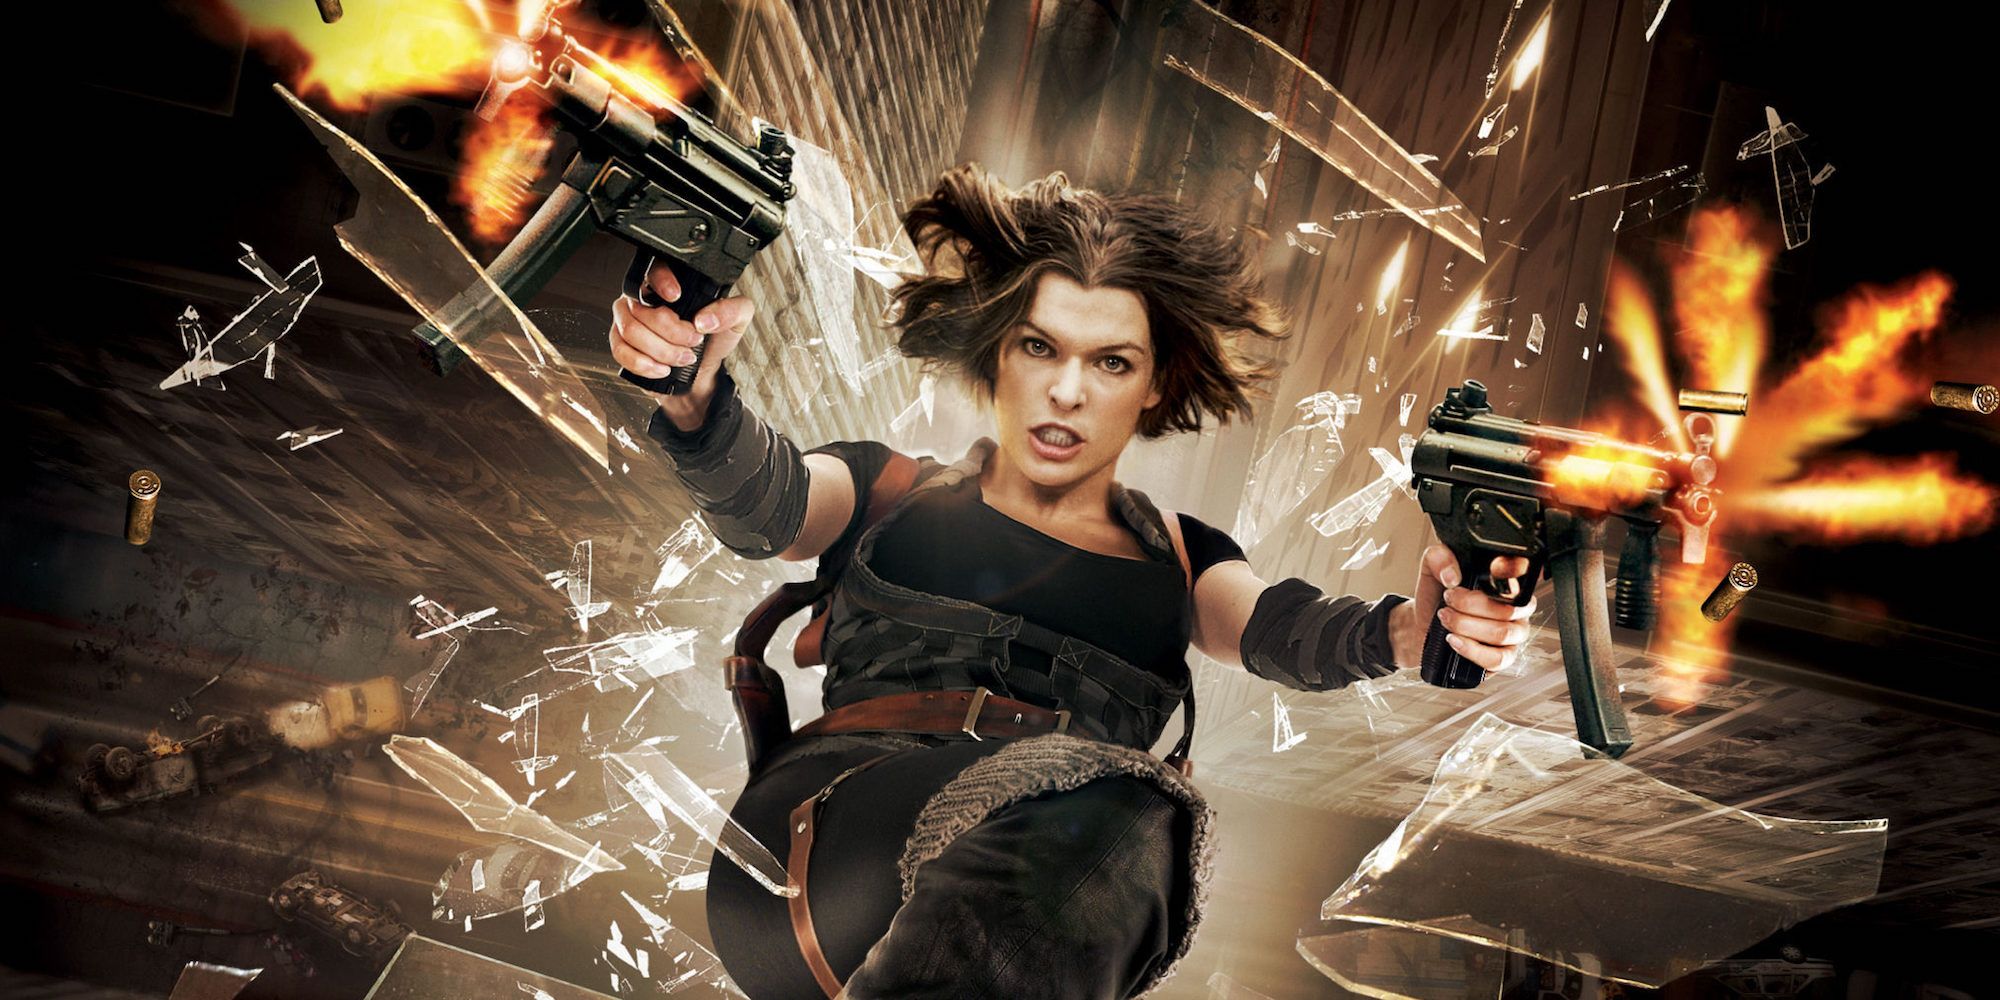 Milla Jovovich as Alice in Resident Evil Afterlife